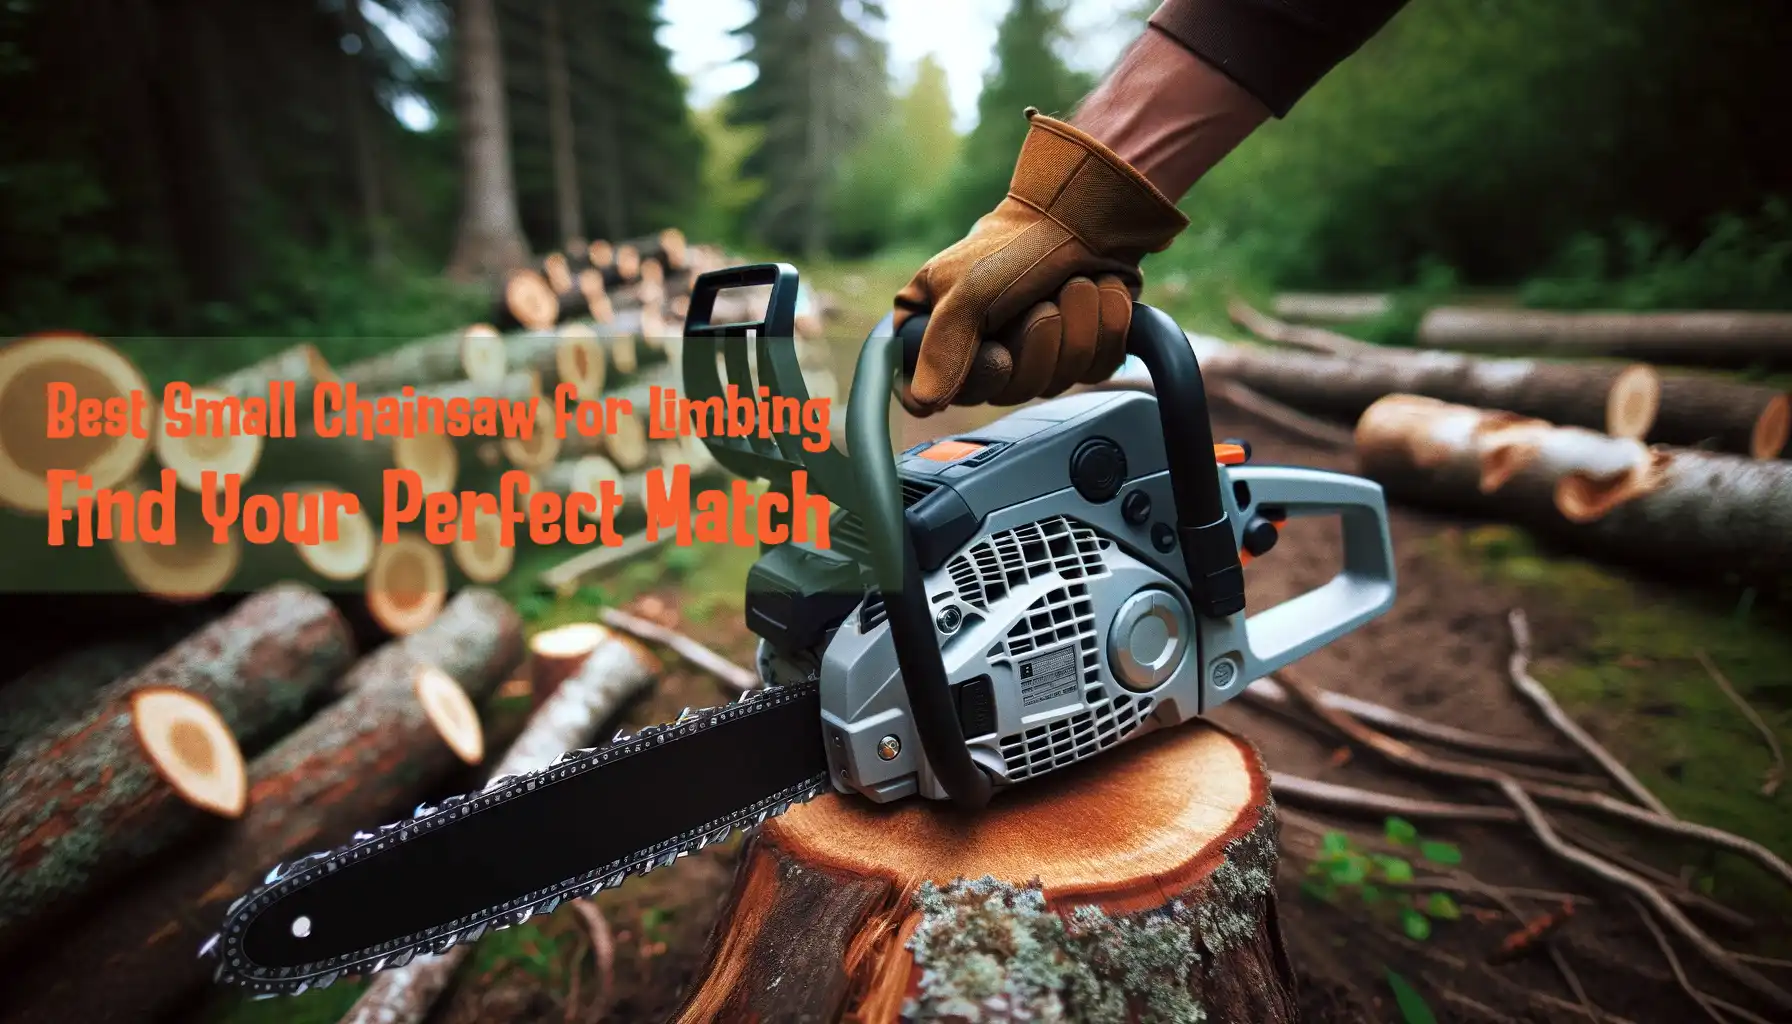 Best Small Chainsaw for Limbing: Expert Reviews & Tips